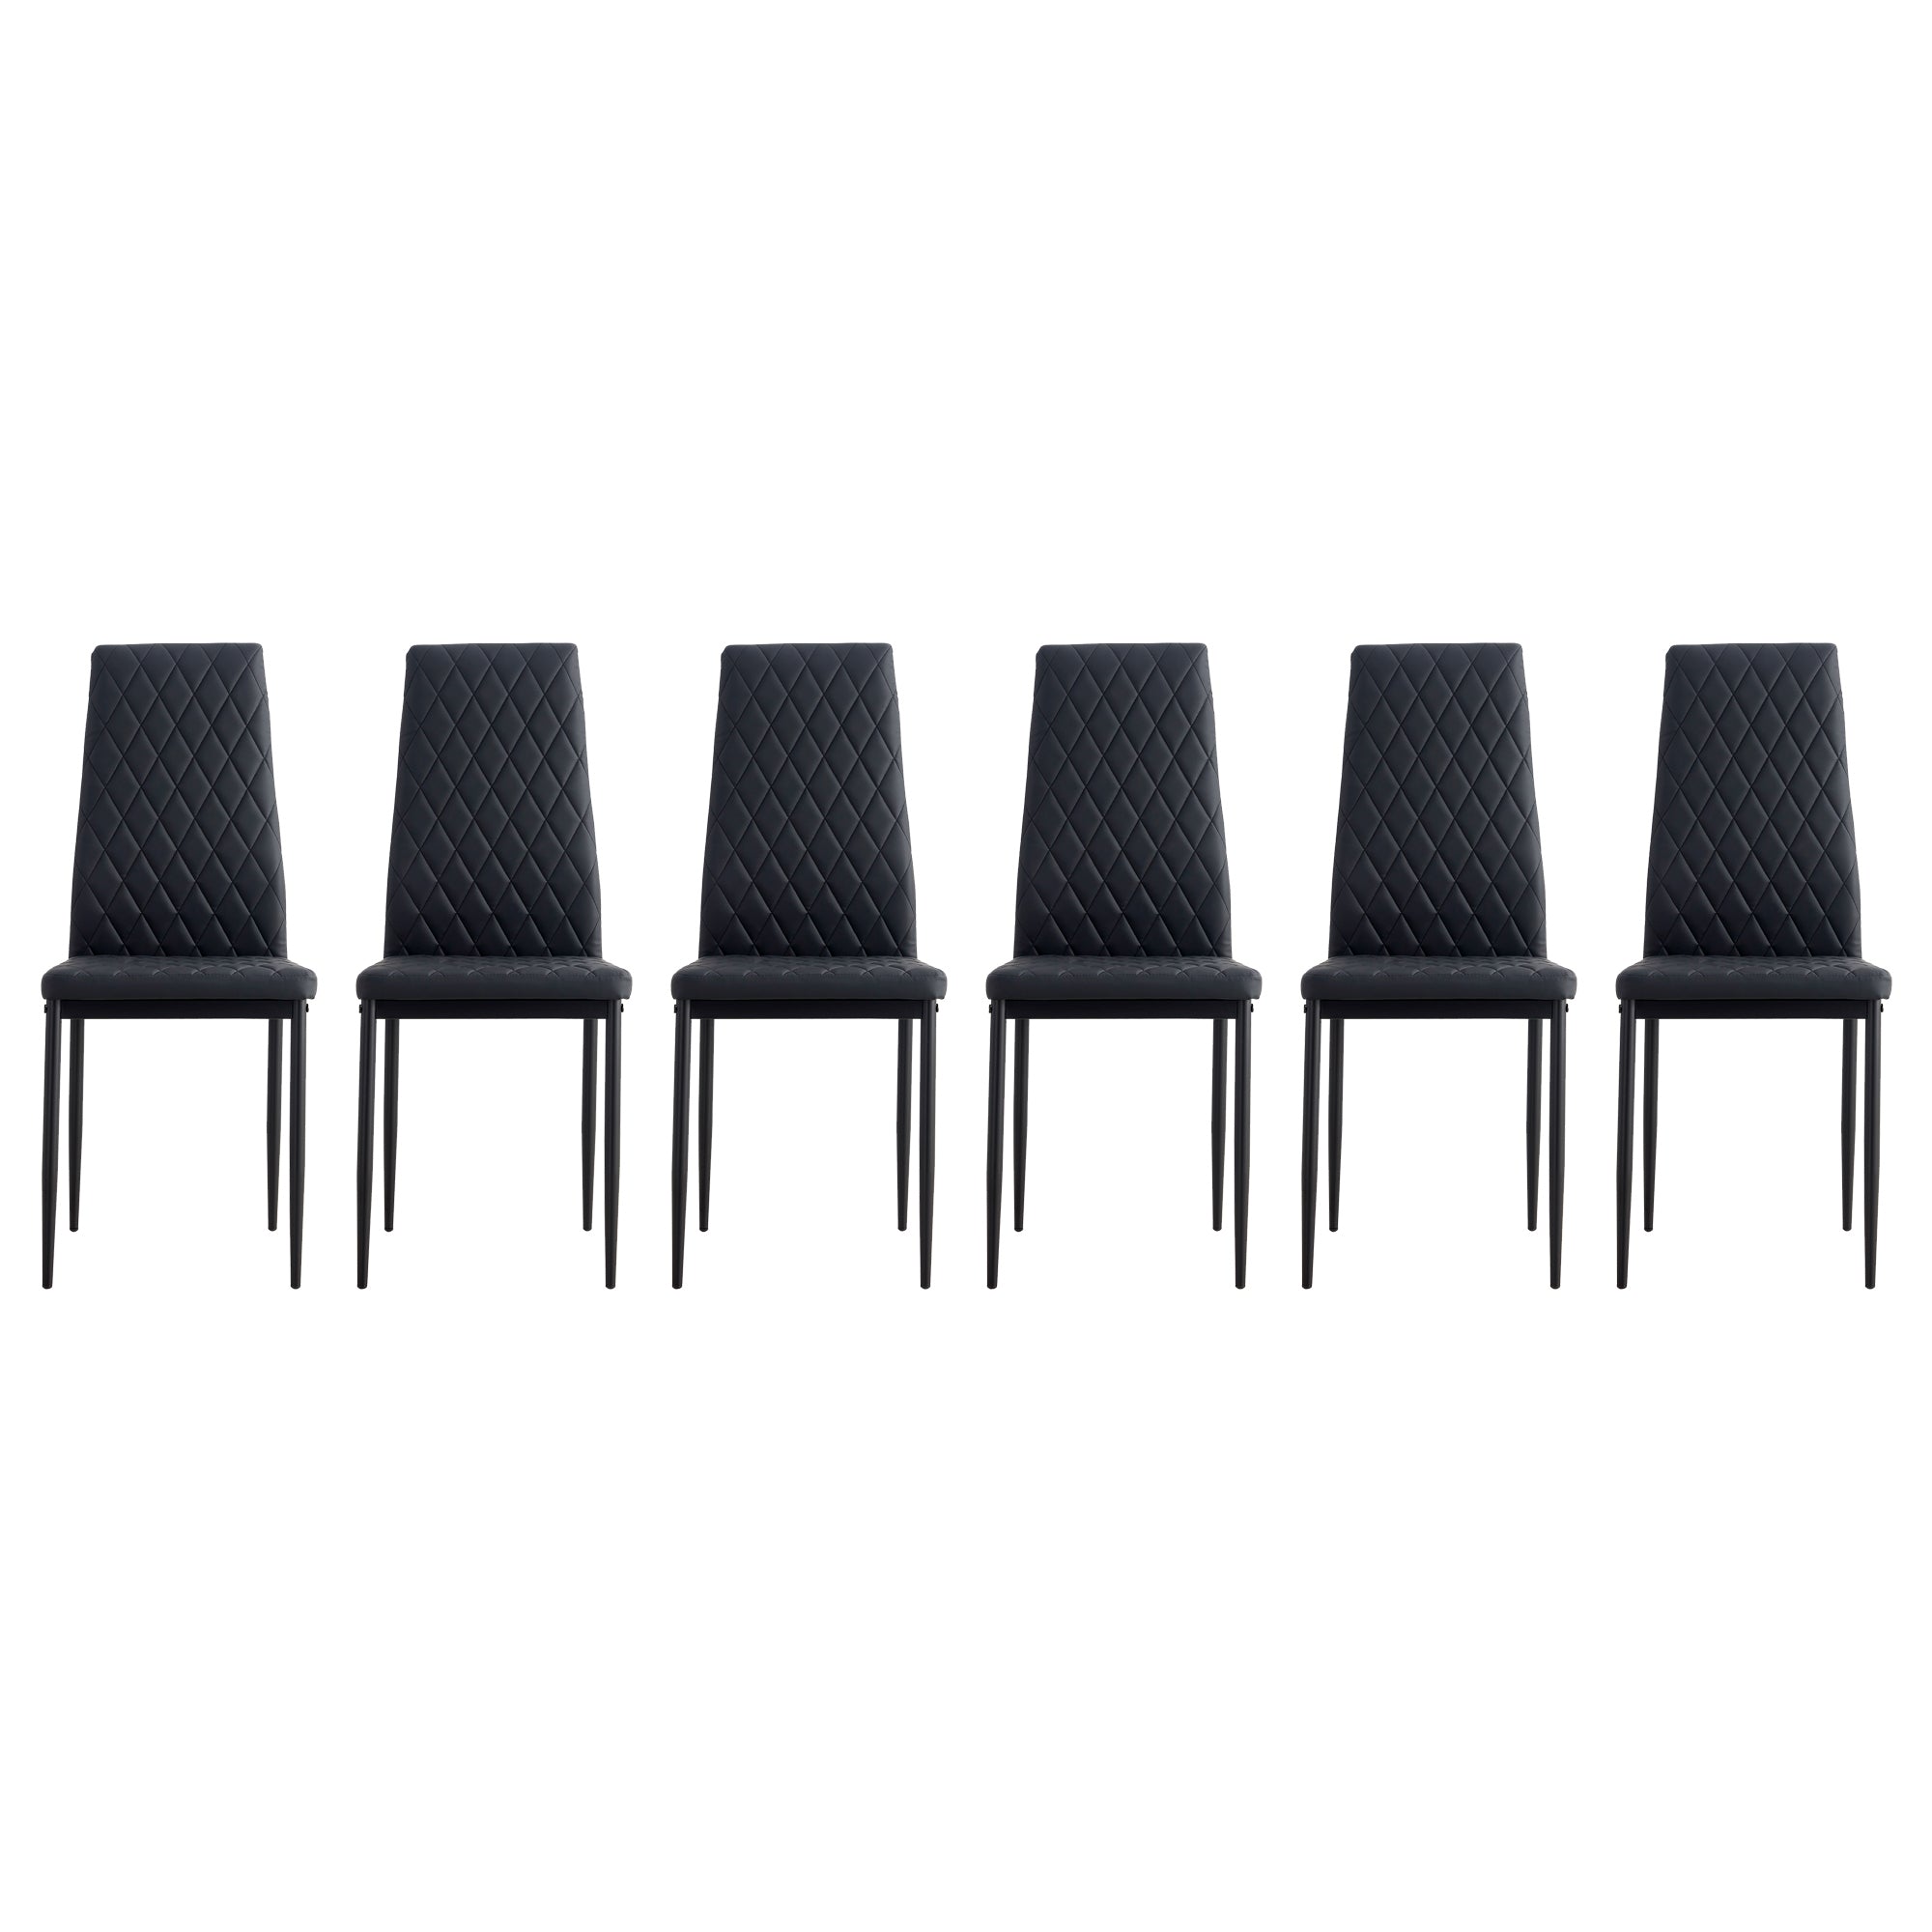 Black PU Leather Kitchen and Dining Chairs (Set of 6)